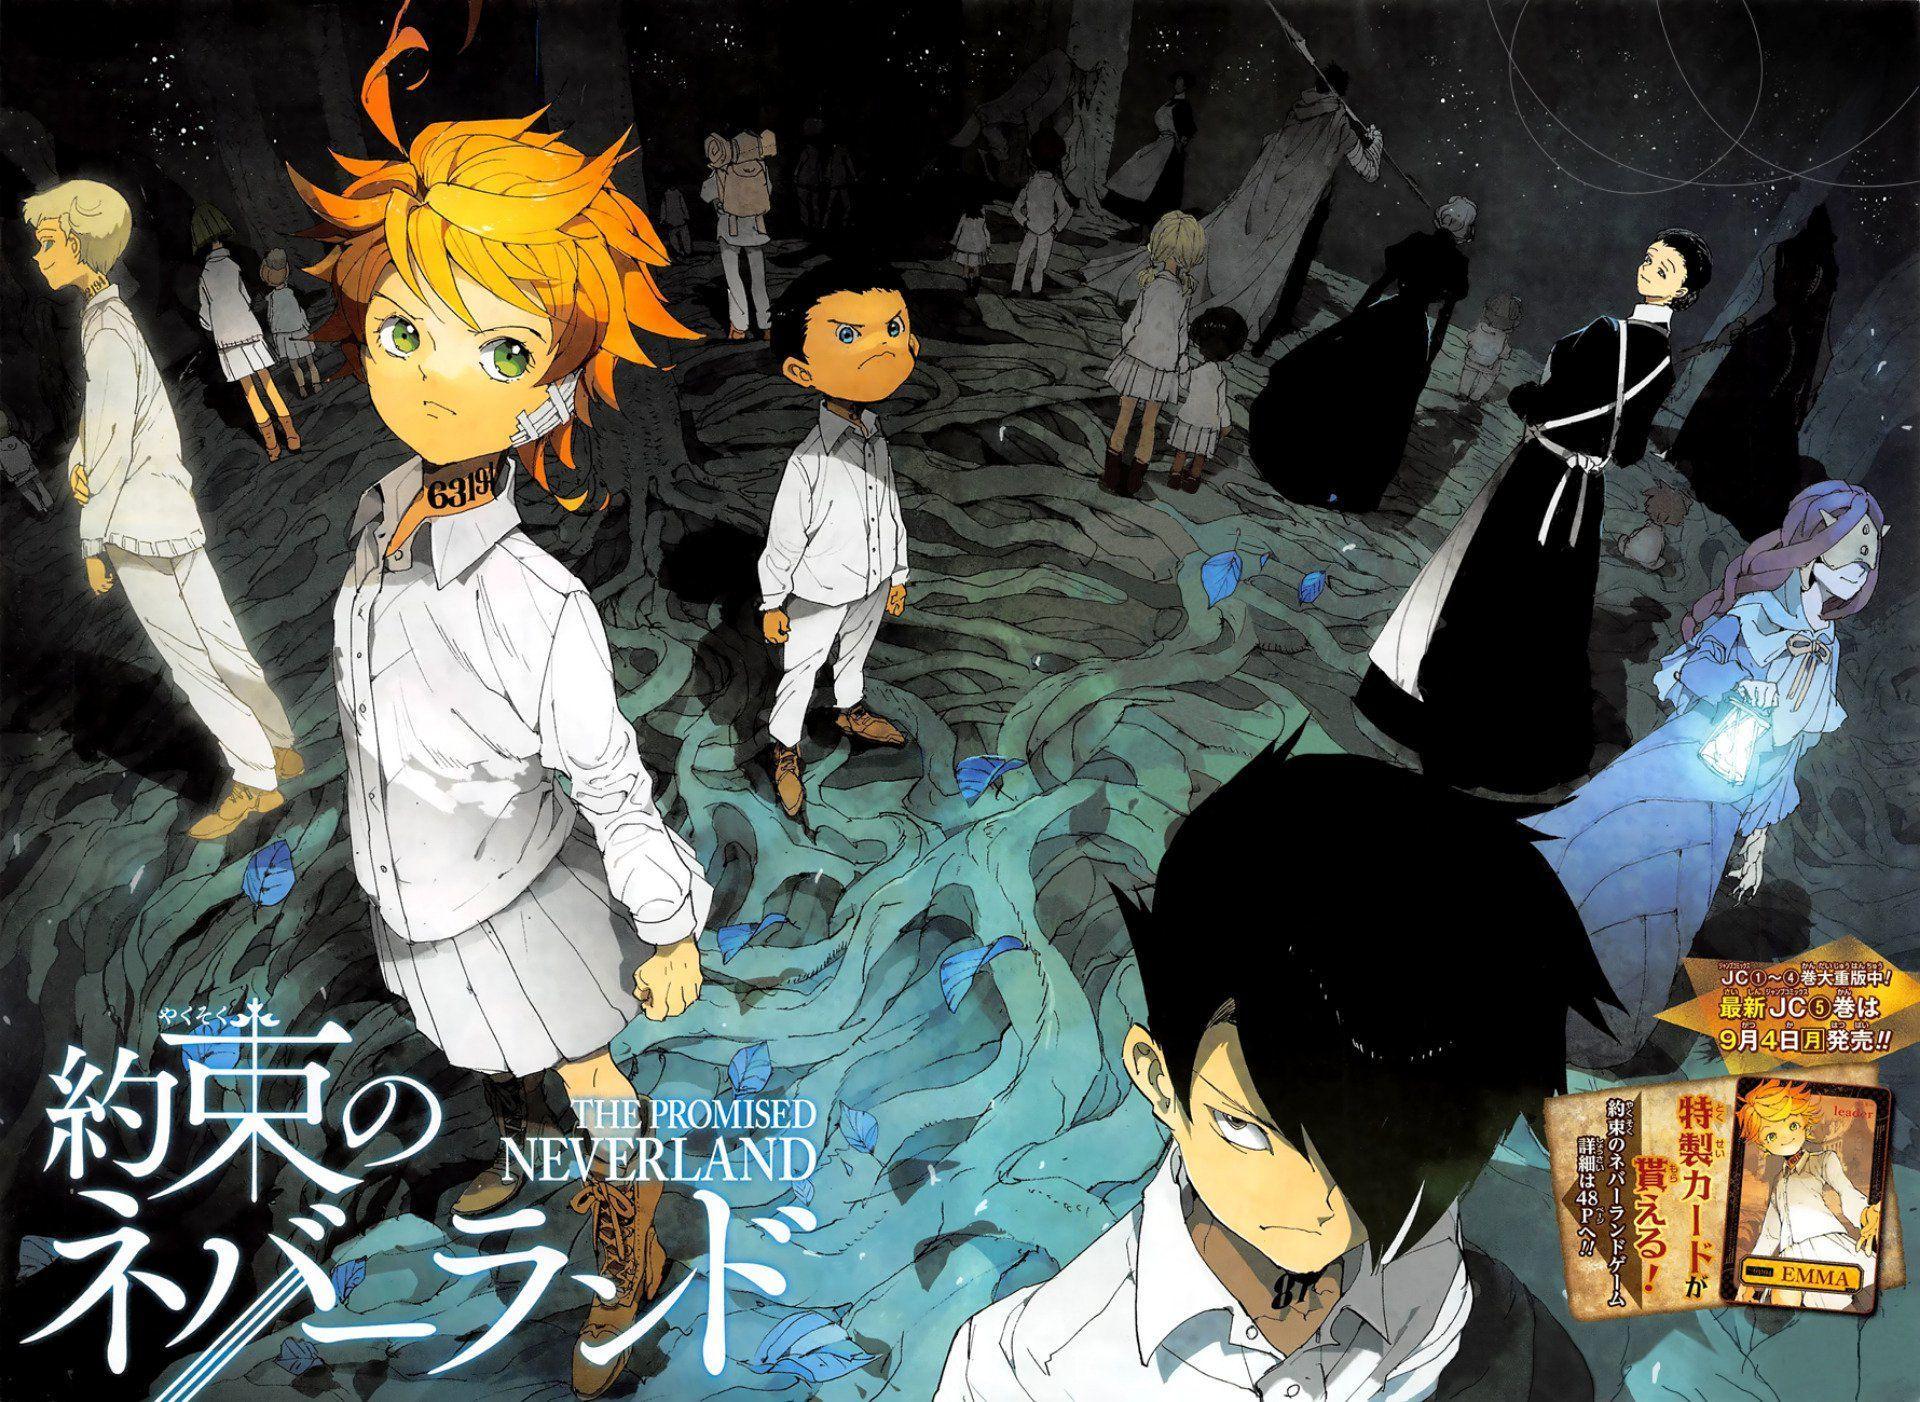 The Promised Neverland Wallpaper For Ipad, The Promised Neverland, Anime